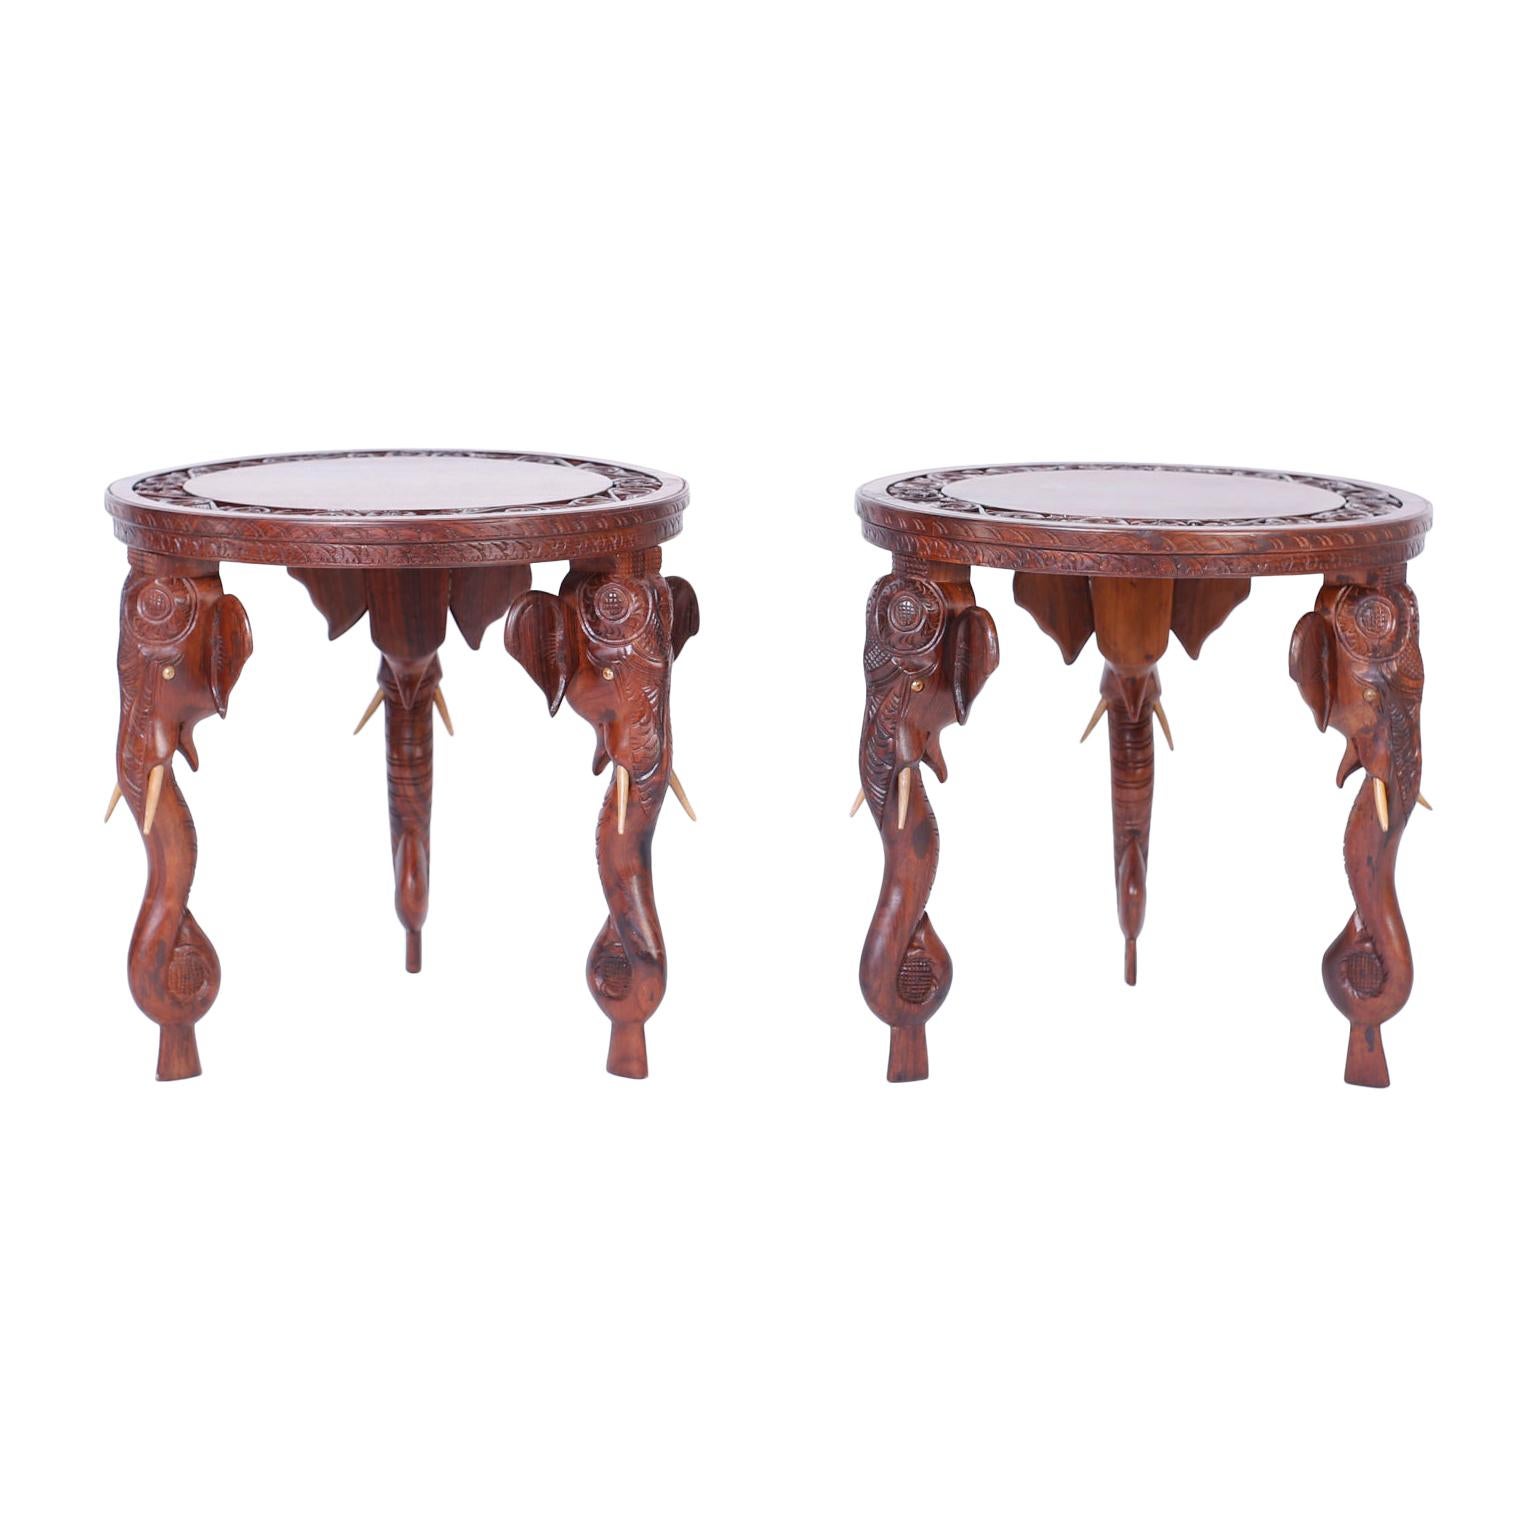 Pair of Anglo-Indian Rosewood Tables or Stands